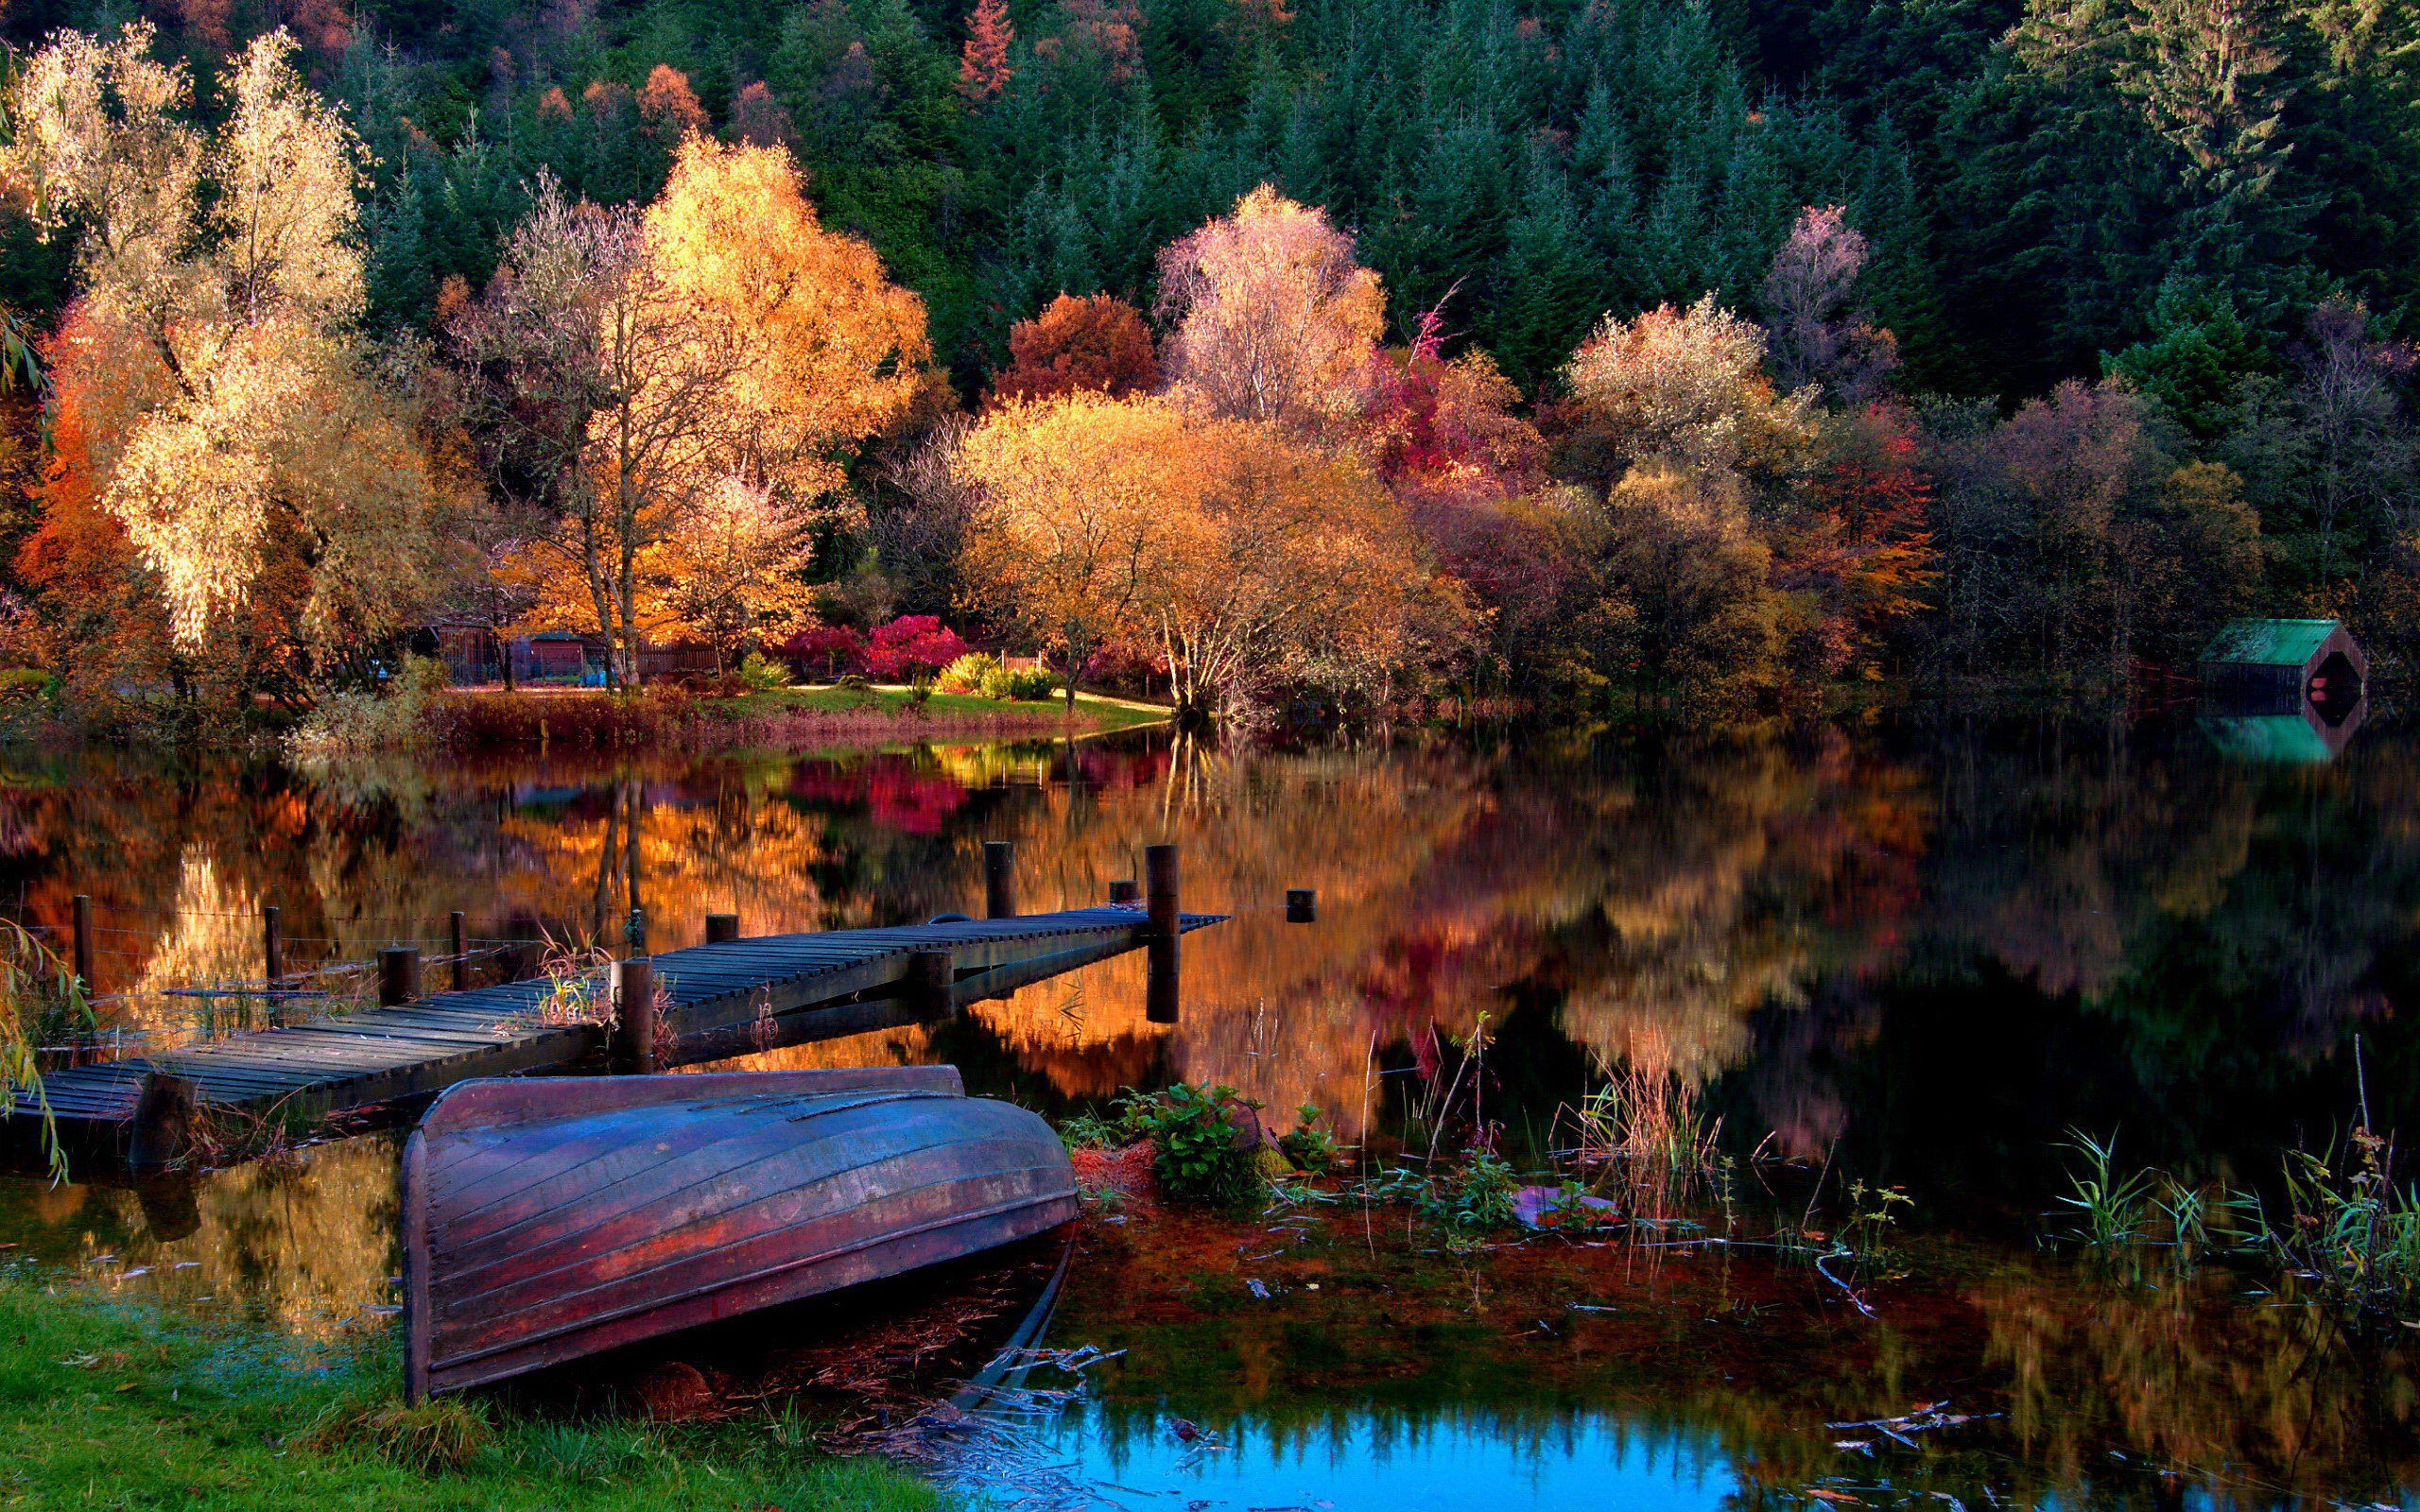 Reflection in the water natural scenery wallpaper #7 - 2560x1600